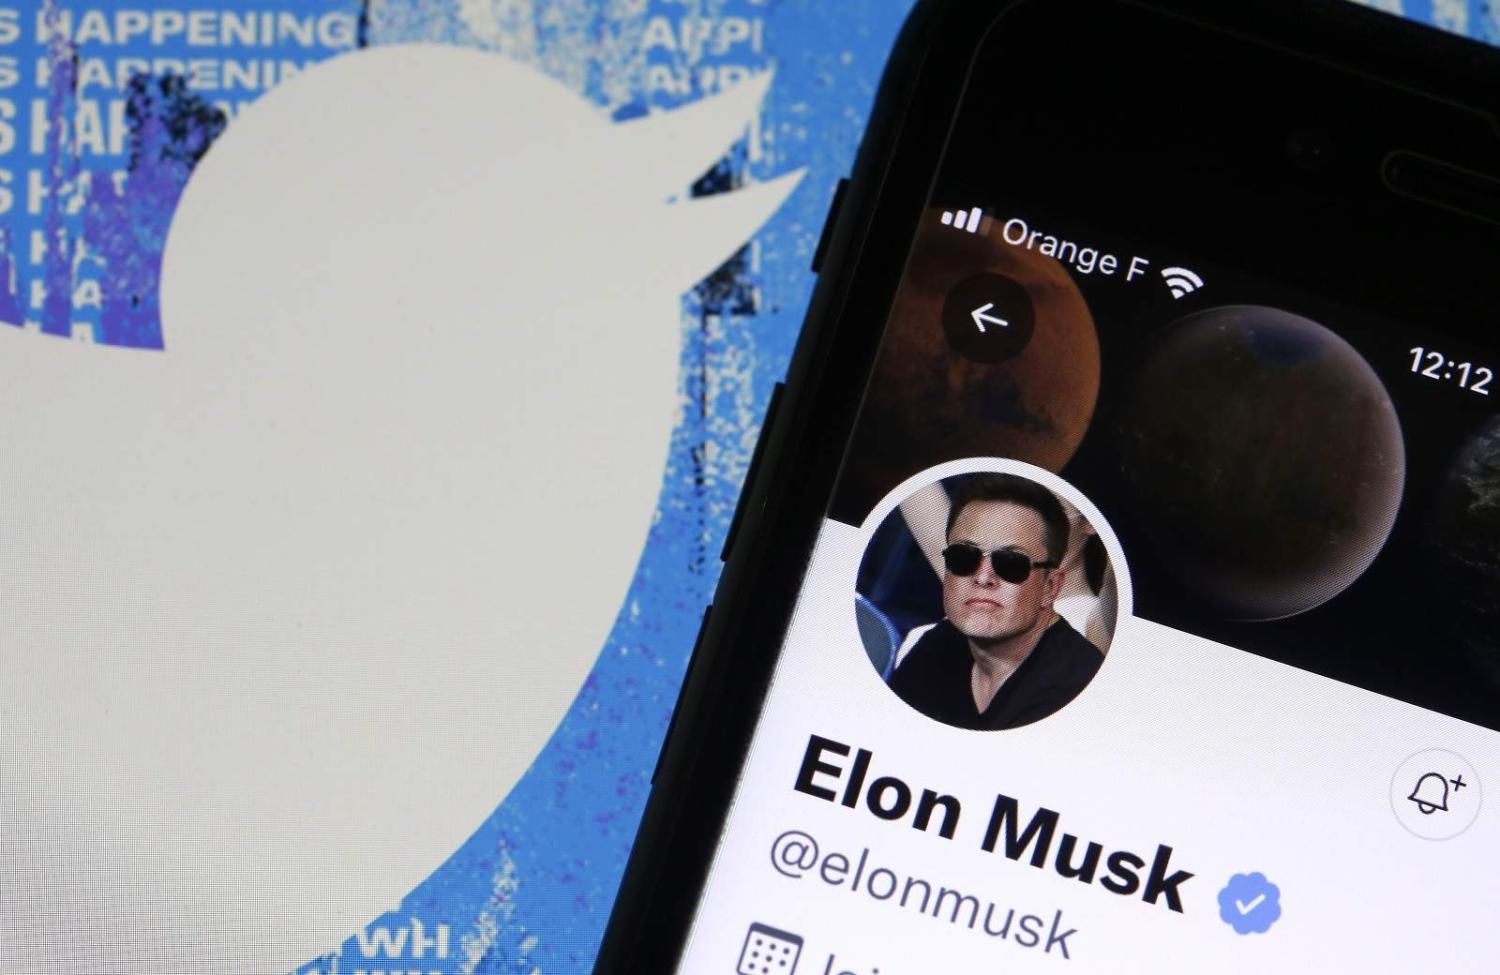 Elon Musk bought the social network Twitter on 25 April for US$44 billion (Illustration by Chesnot/Getty Images)